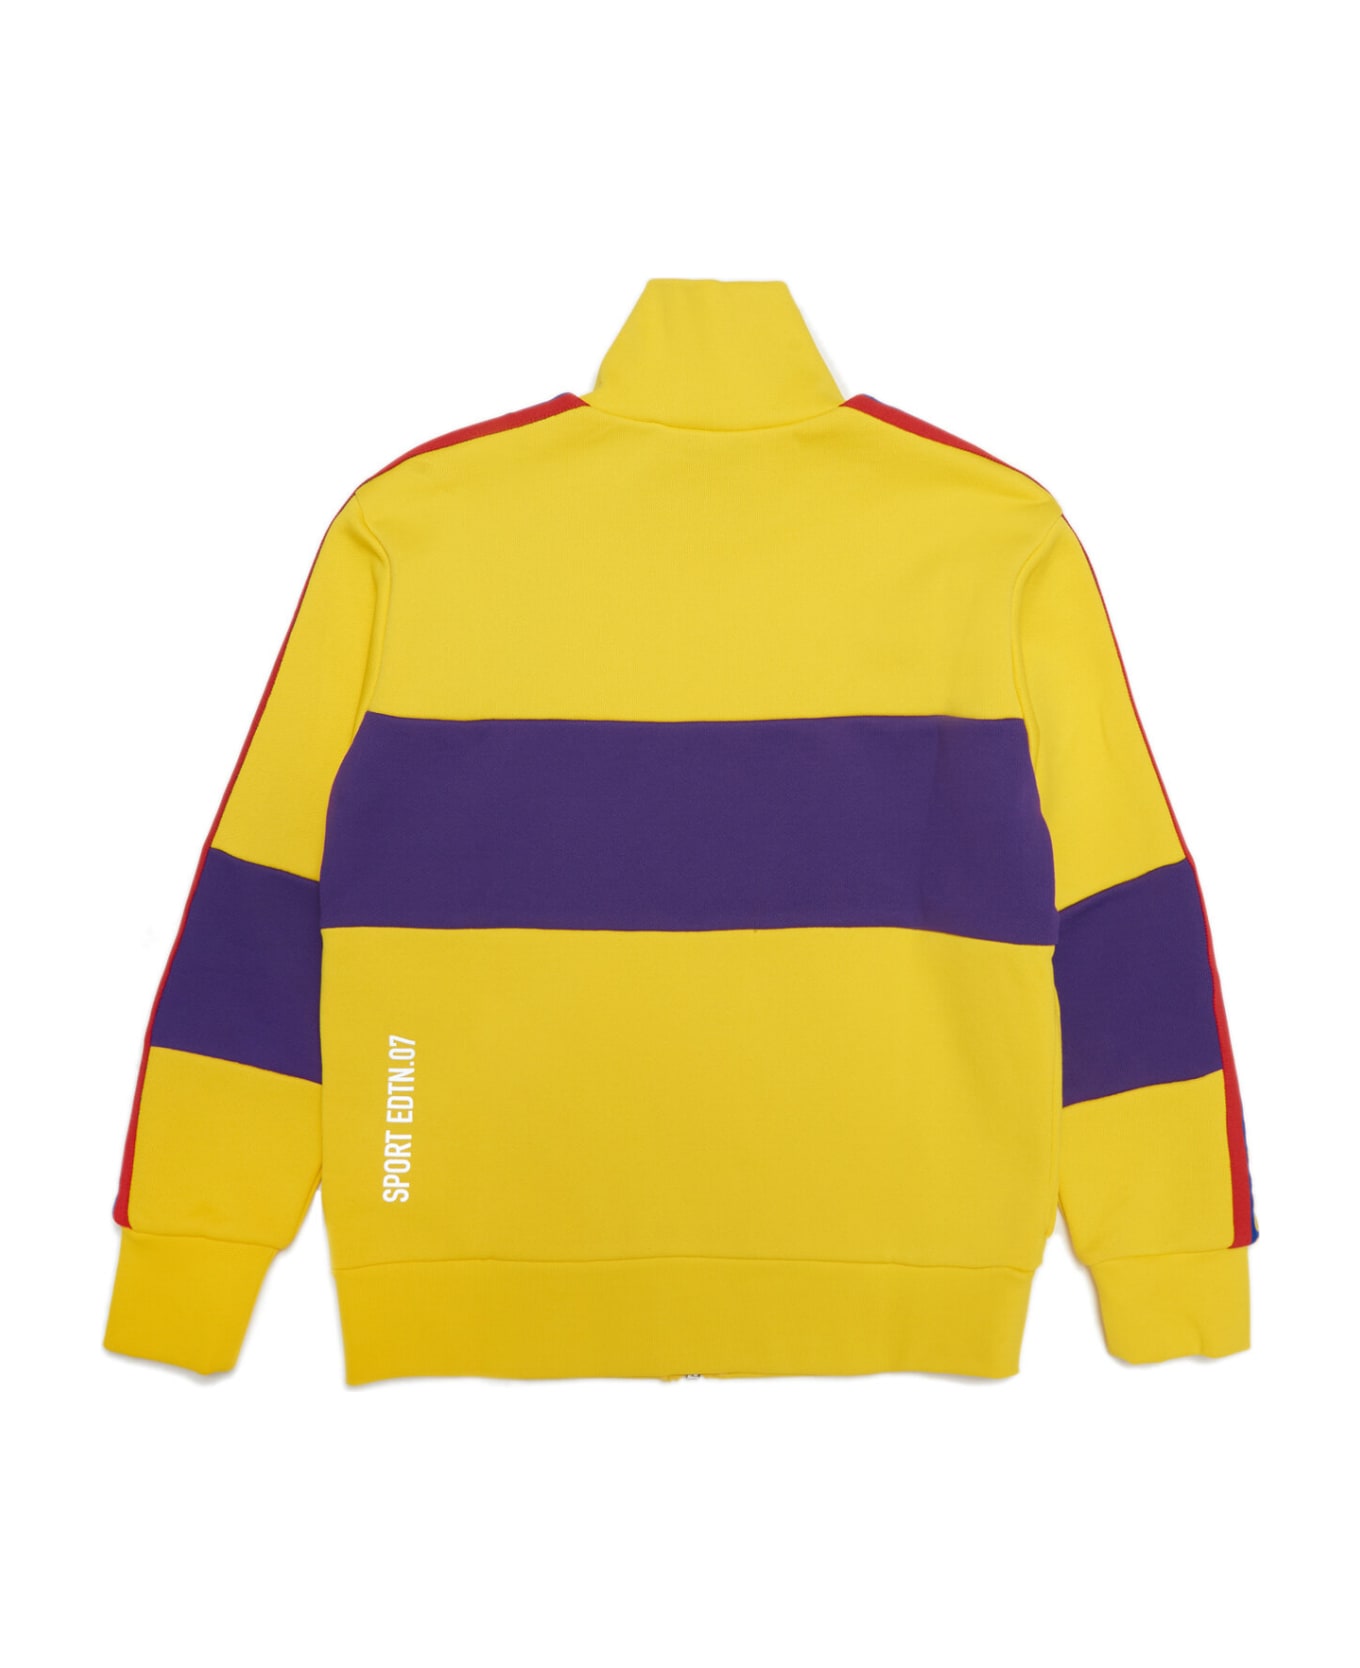 Dsquared2 D2s675u Cool Fit Sweat-shirt Dsquared Yellow Sweatshirt With Zip And Logoed Ribbon Sport Edtn 07 - Vibrant yellow